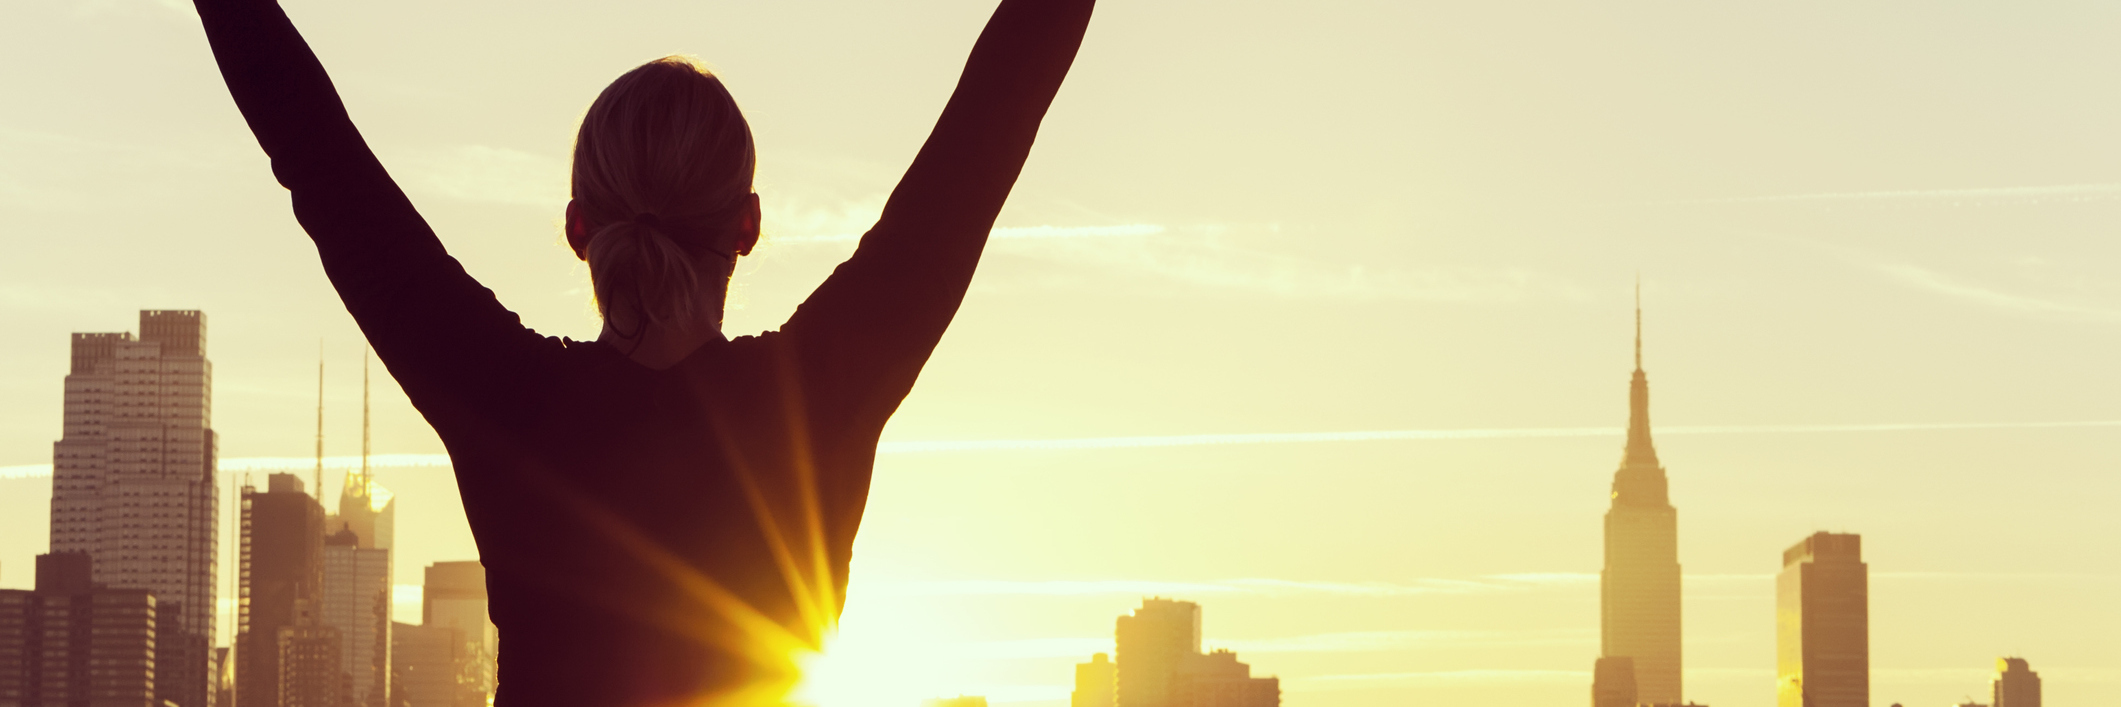 woman with her arms raised in success by the new york skyline at sunrise